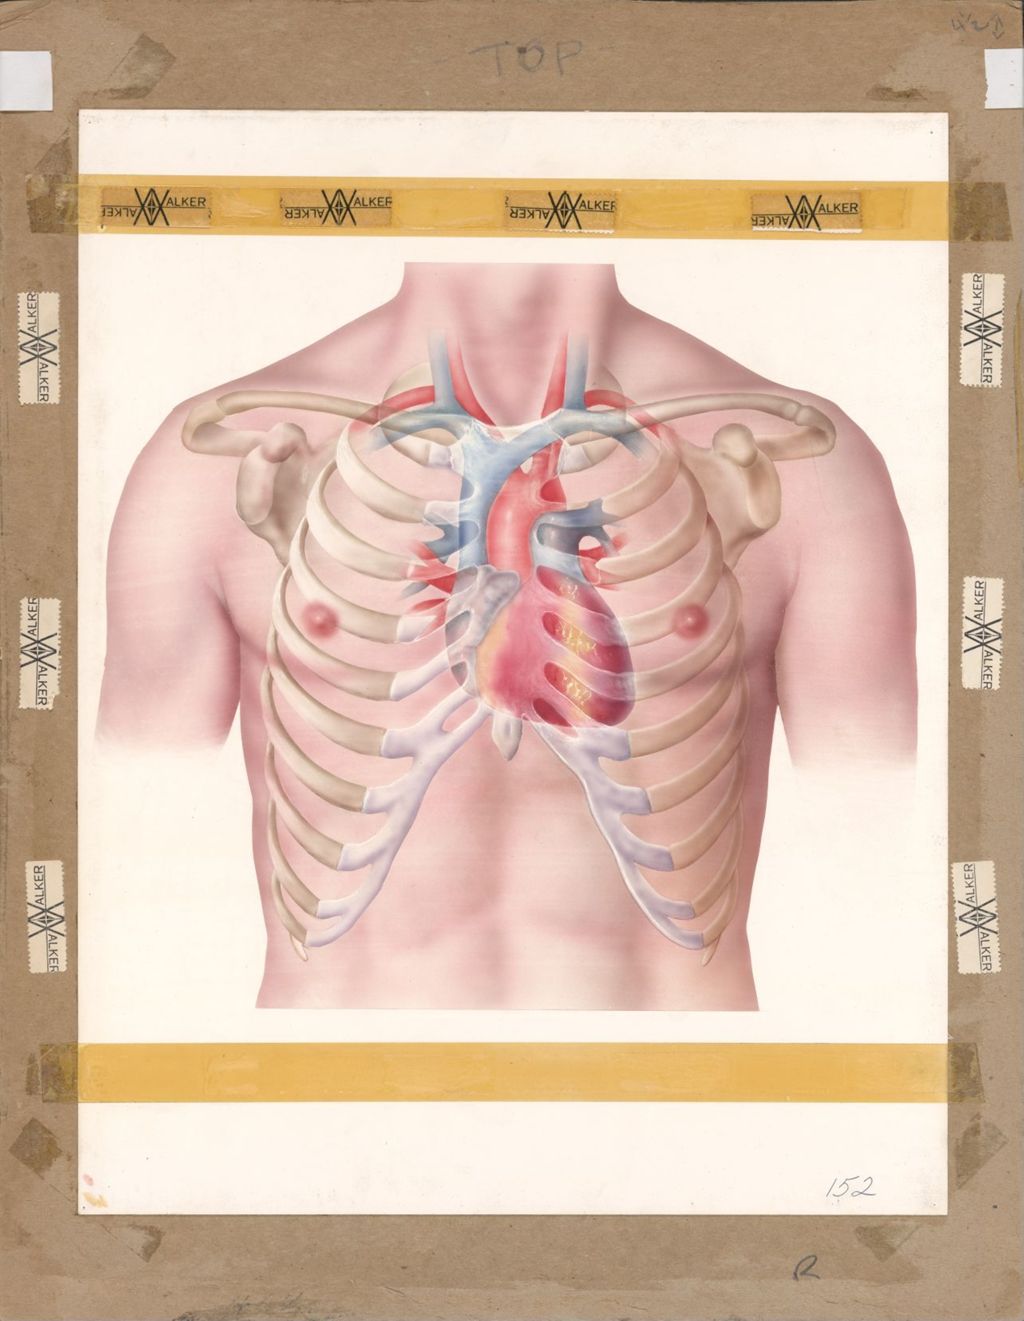 Miniature of Artwork of chest showing ribcage and position of heart and major arteries behind it